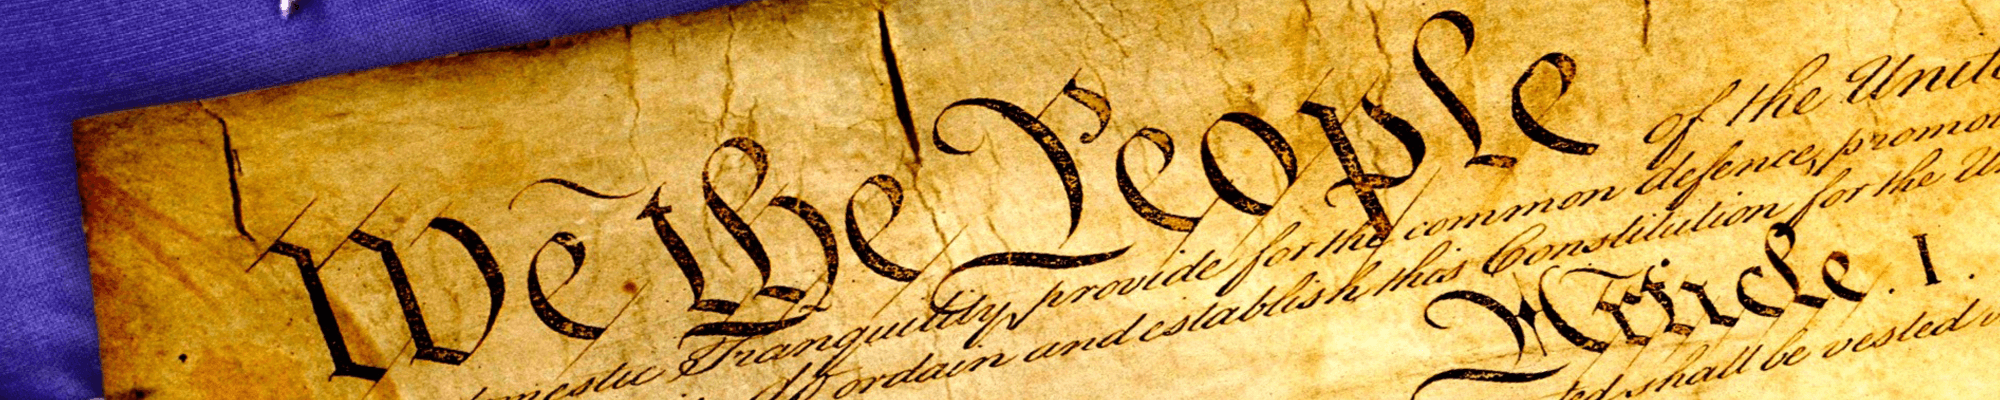 up close of the top of the U.S. constitution - We the People